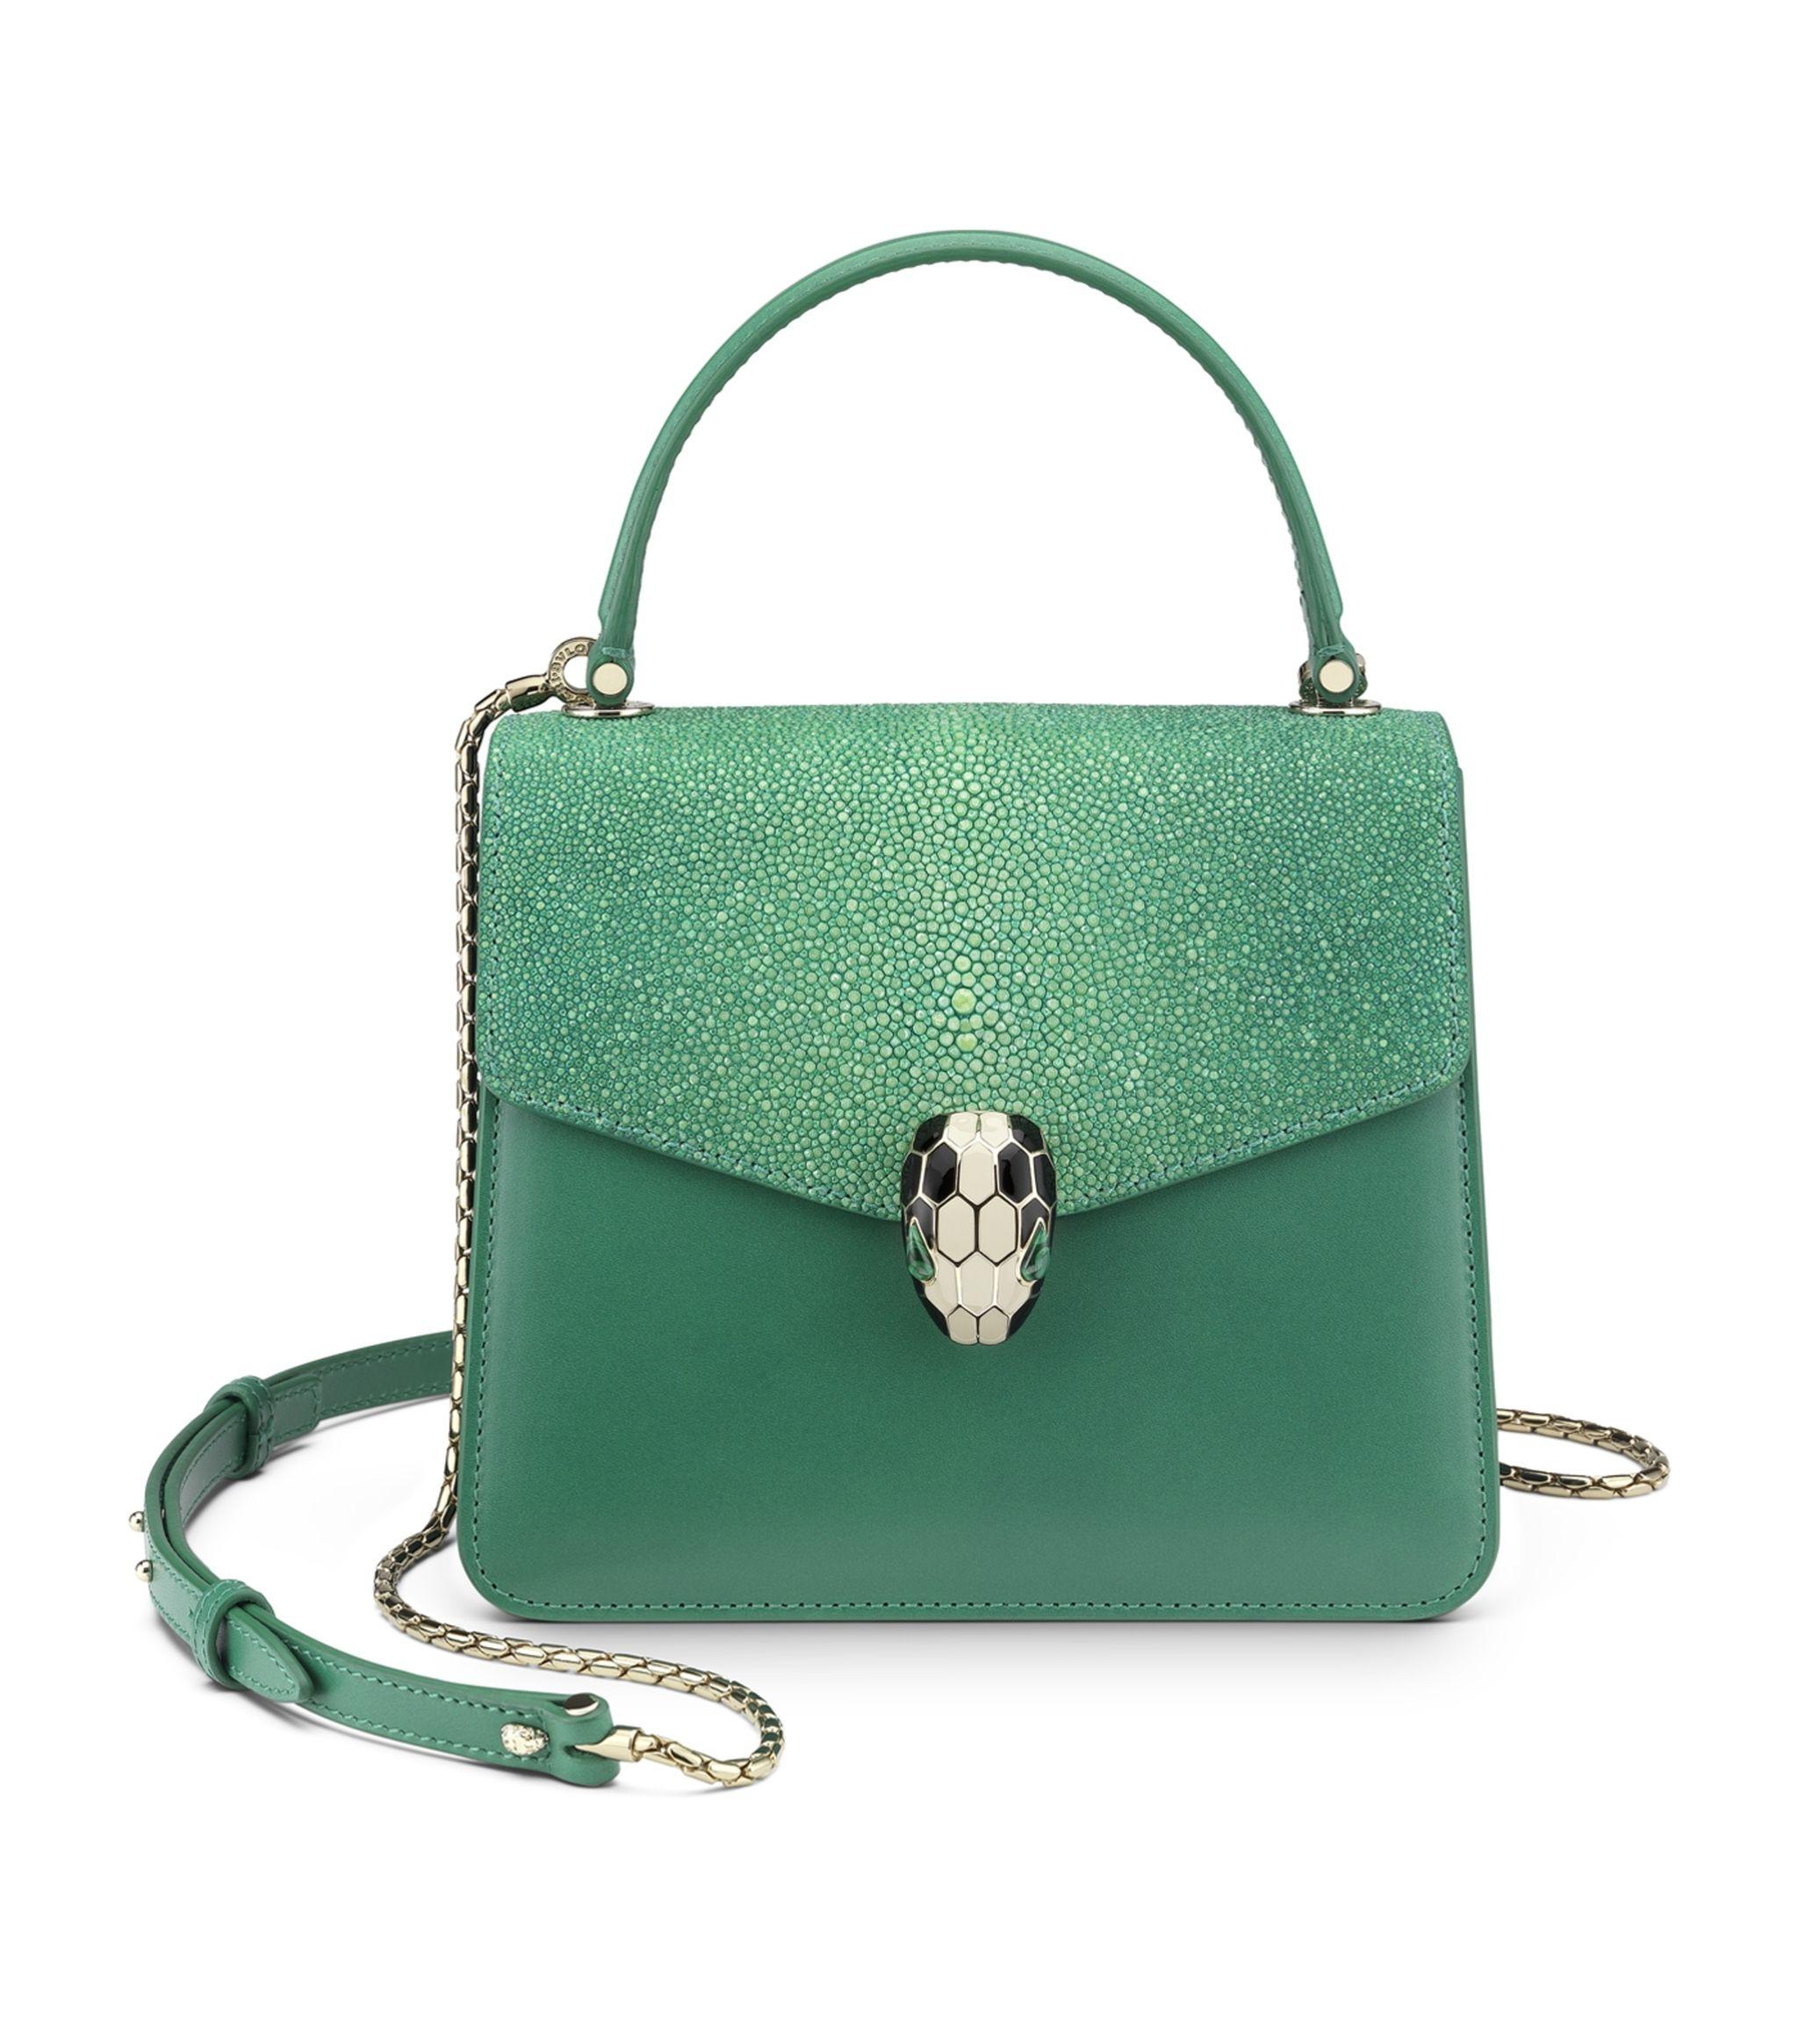 BVLGARI Leather Galuchat Serpenti Forever Top Handle Bag in Green - Lyst